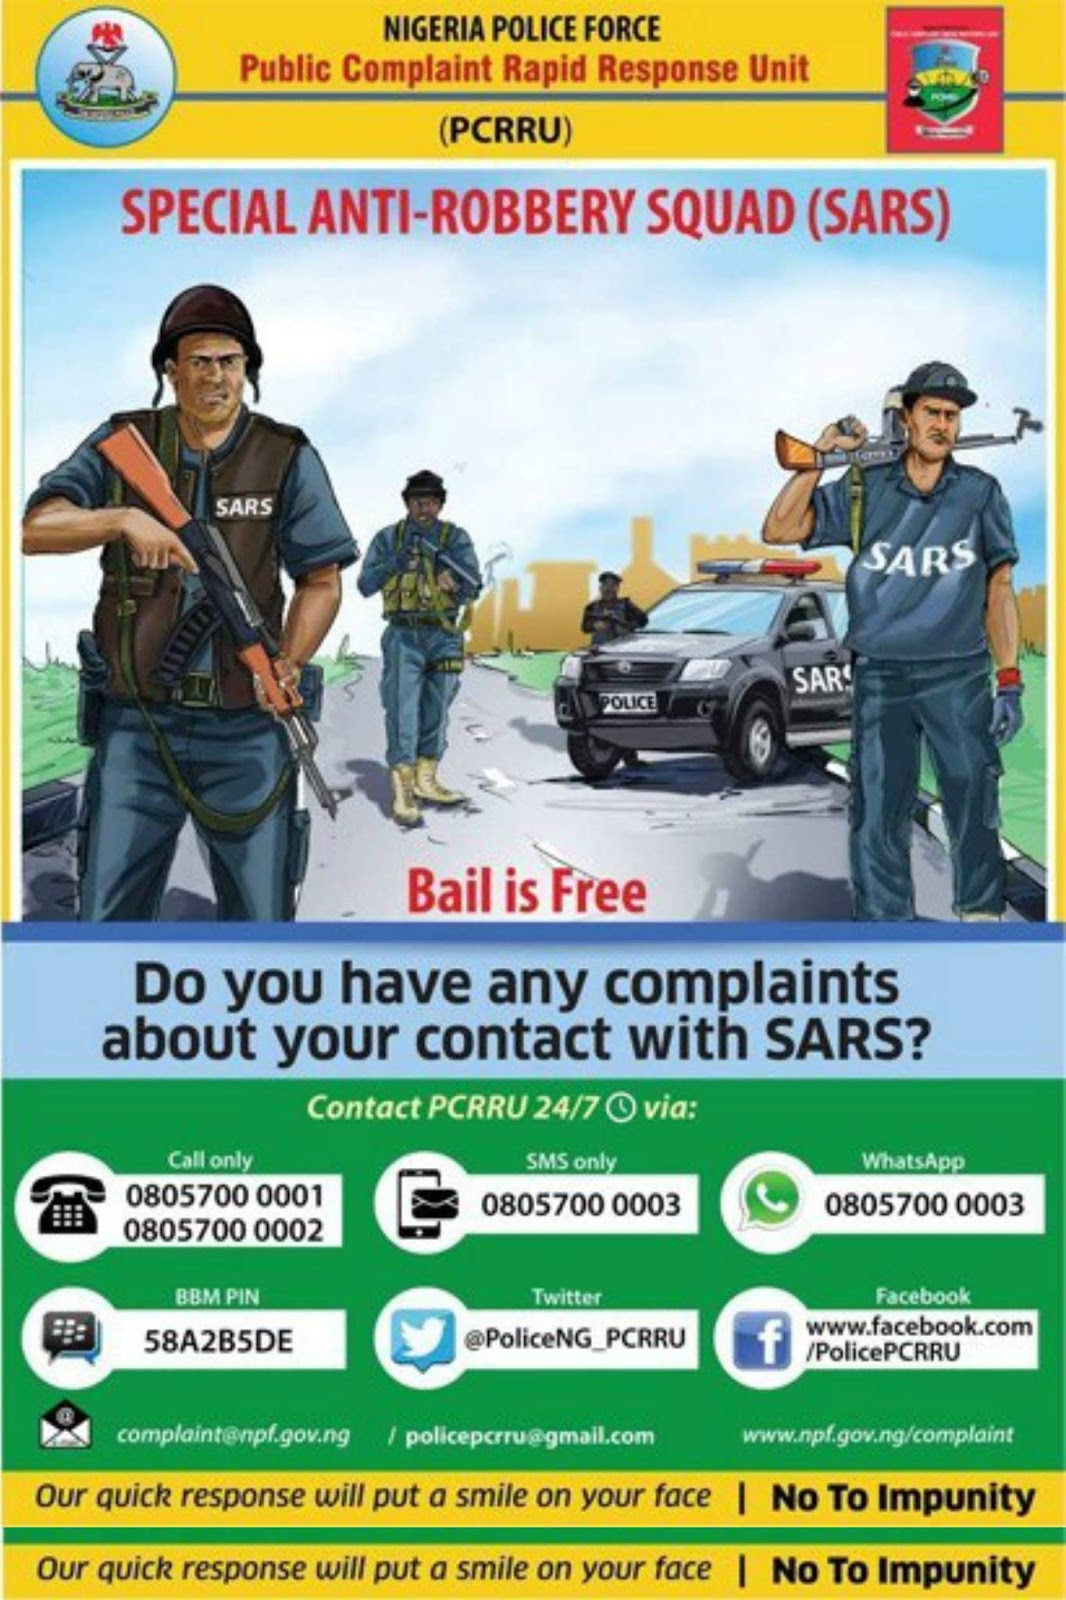 iphone is now a crime in Nigeria says Sars : End Special Anti-Robbery Squad Brutality